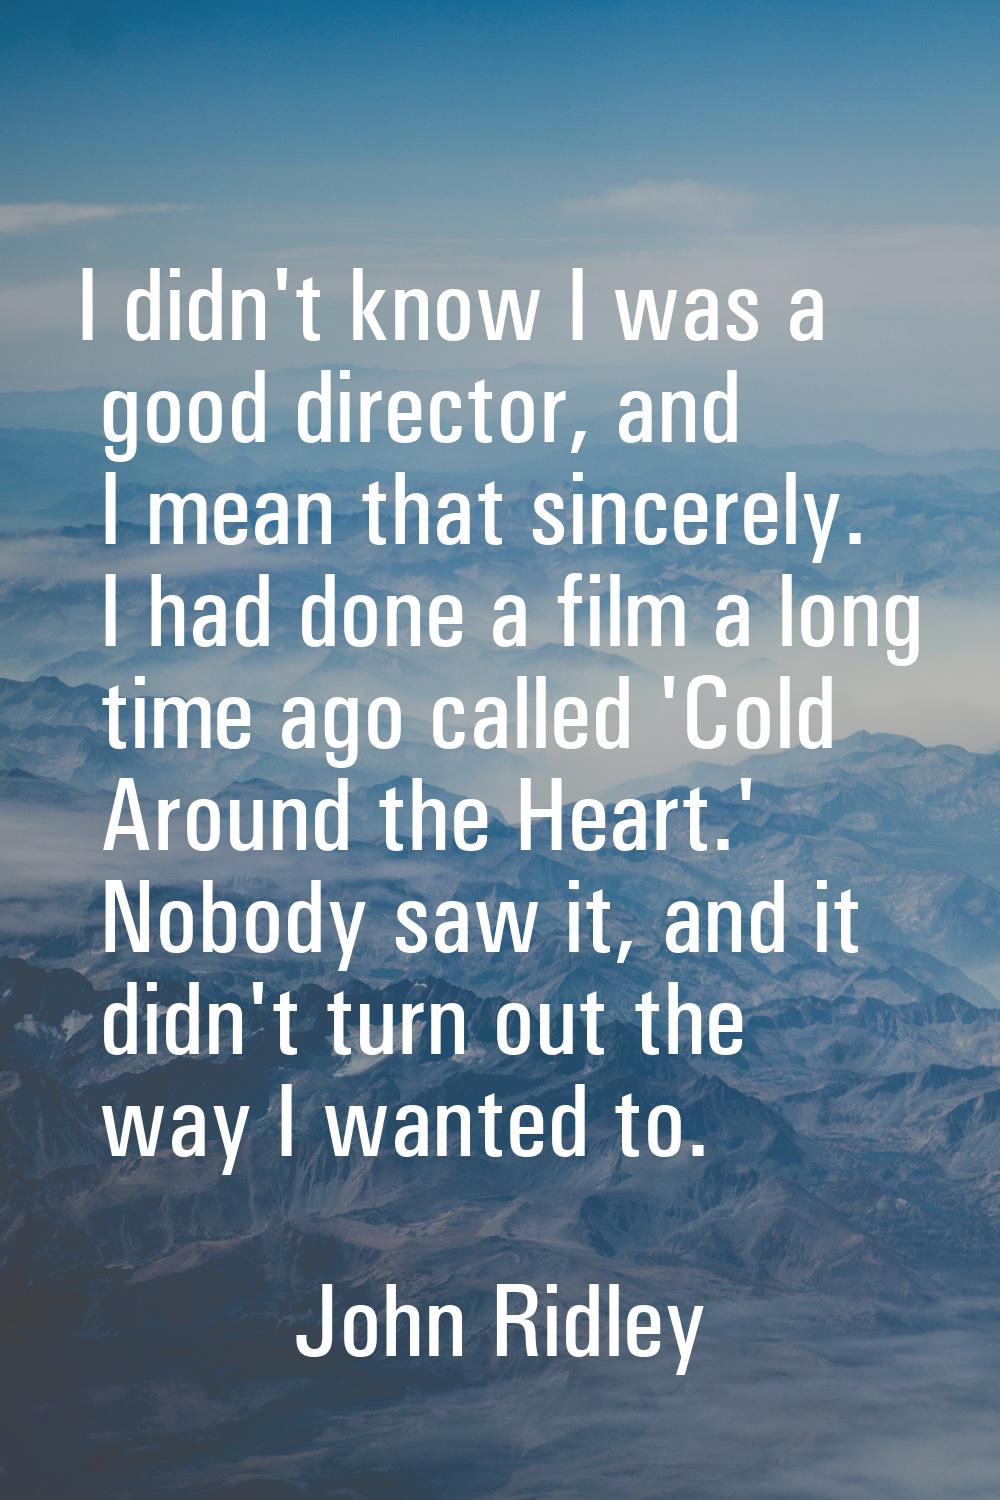 I didn't know I was a good director, and I mean that sincerely. I had done a film a long time ago c